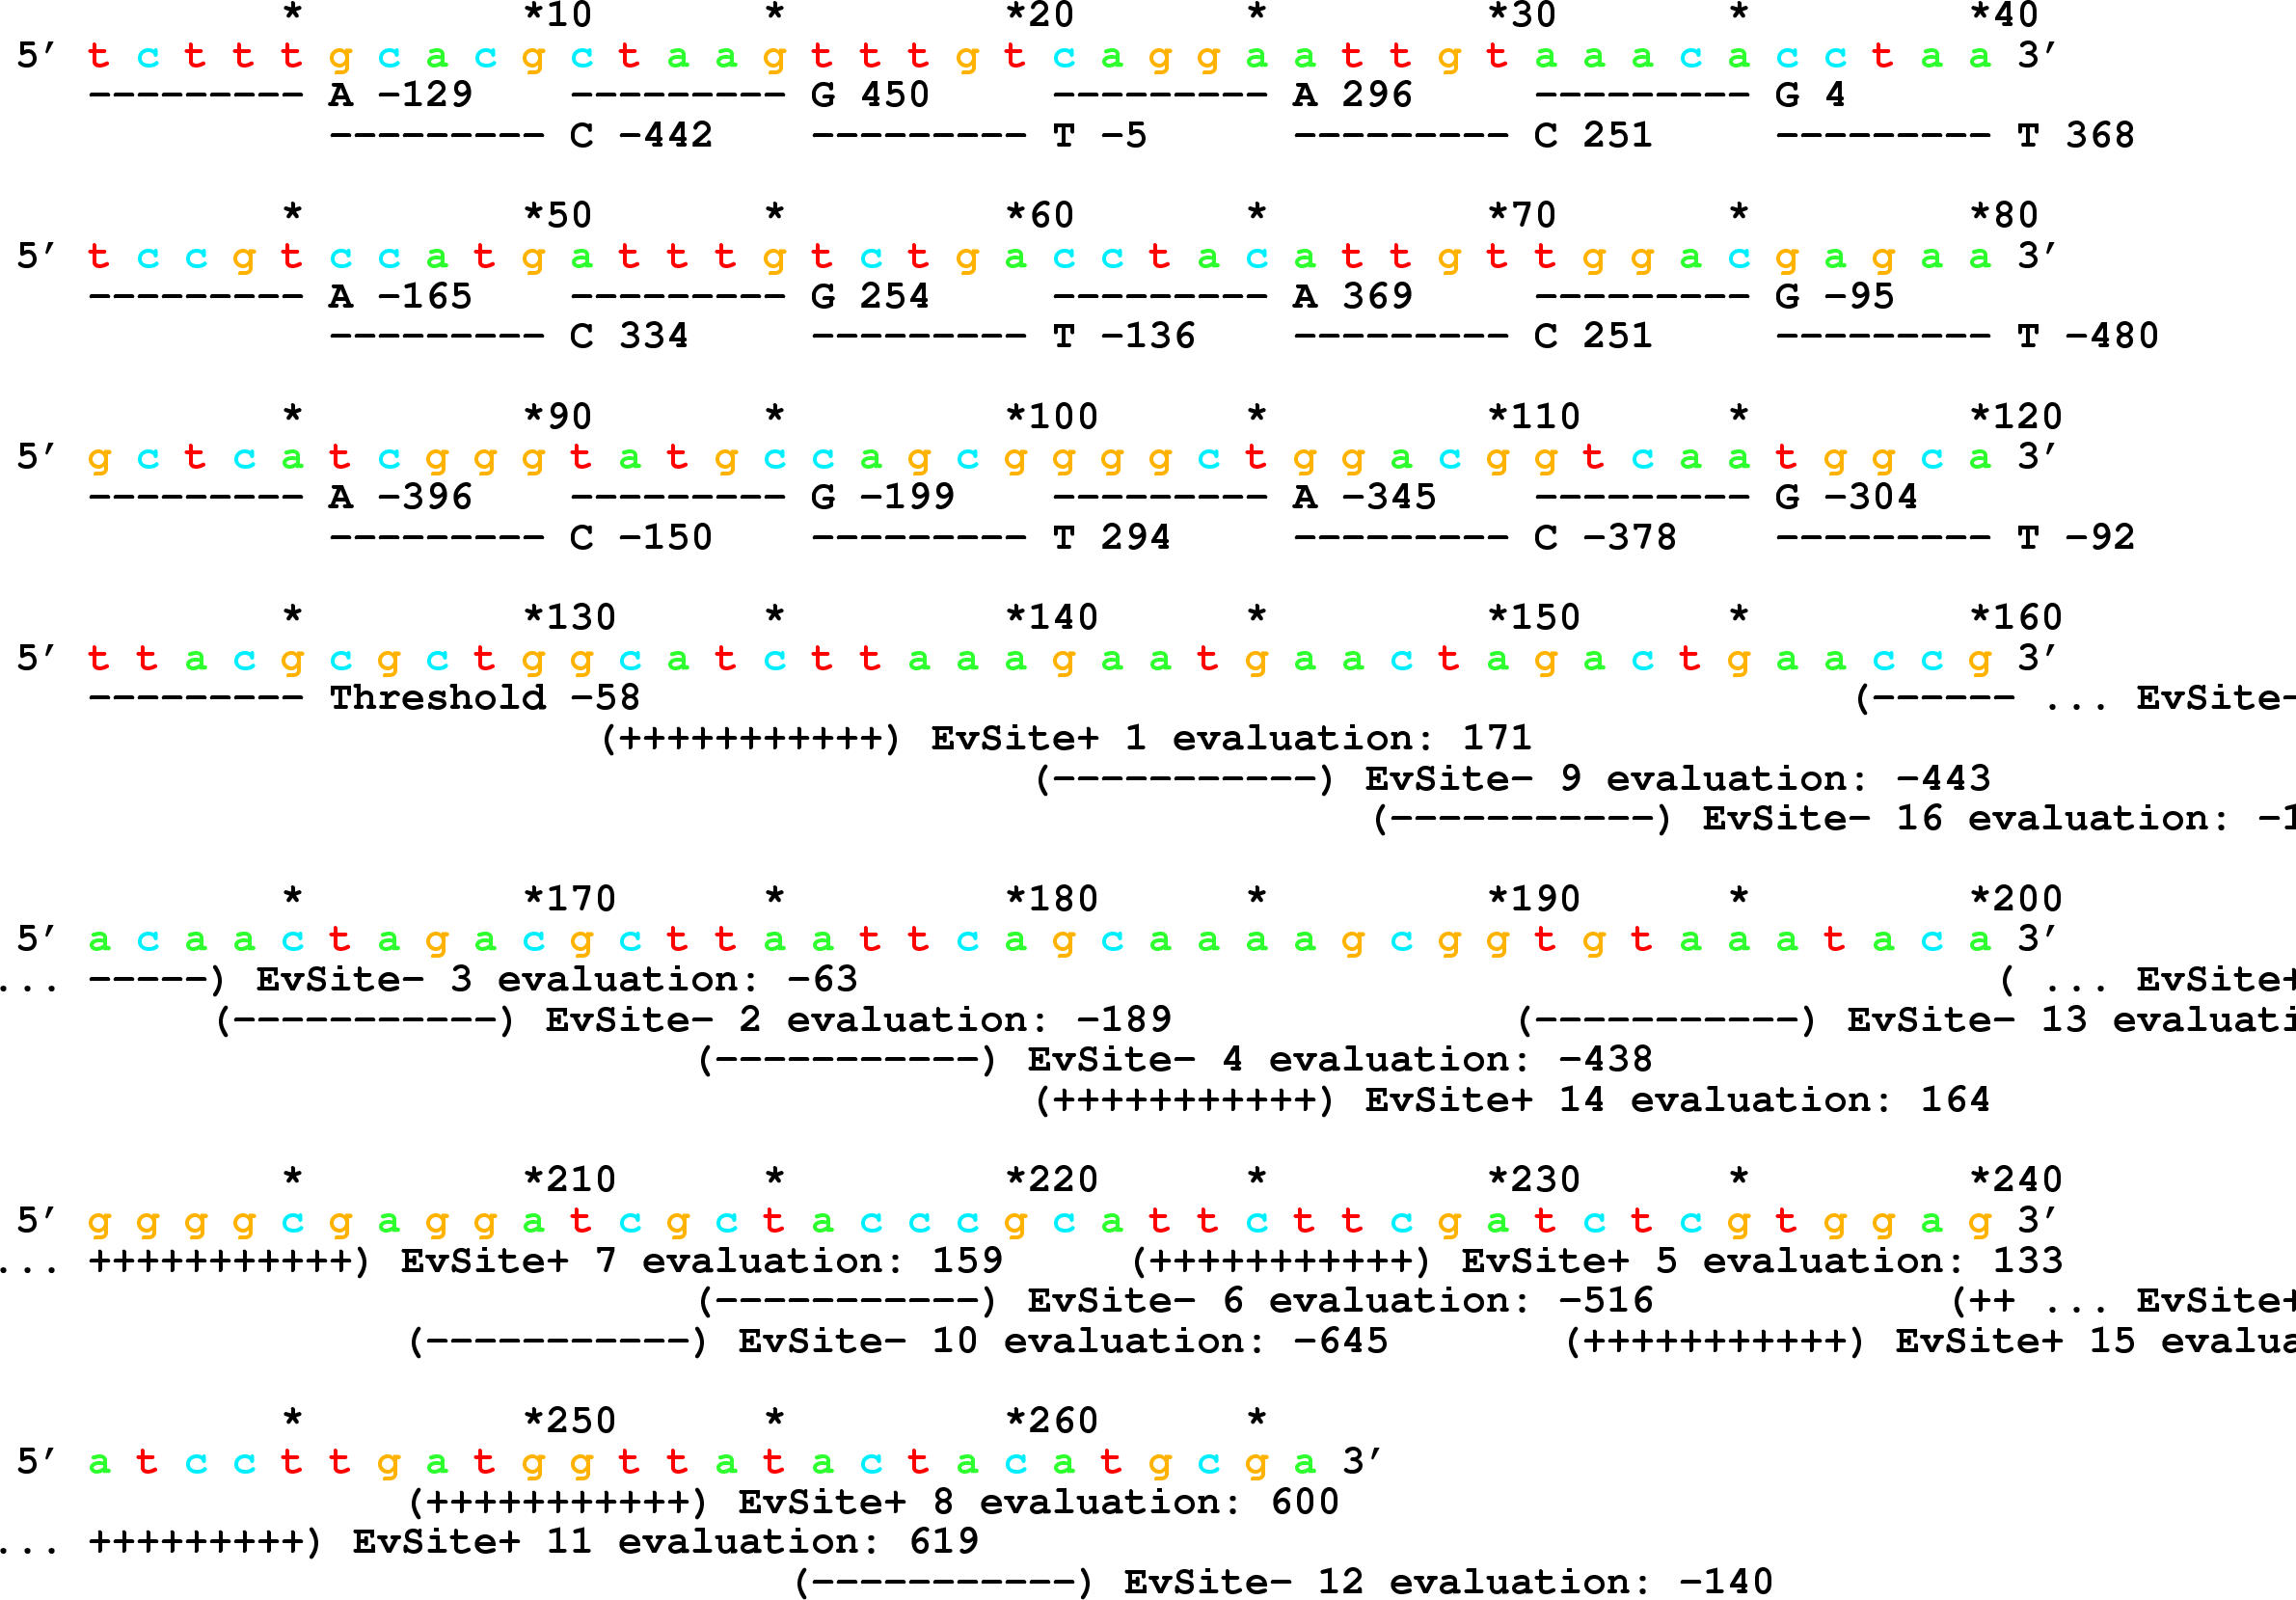  A sequence from the ev program. A 266 base sequence is
marked every 10 bases.  The first part of the sequence has
a 'gene' with parts marked by underlines.  Each underline
has a letter and a number.  The letters repeat A, C, G, T.
The numbers are computed from the two's complement notation
of the sequence coded as 00, 01, 10 and 11. the remainder
of the genome consists of sites marked with plus (for
functional) or minus for (non functional).